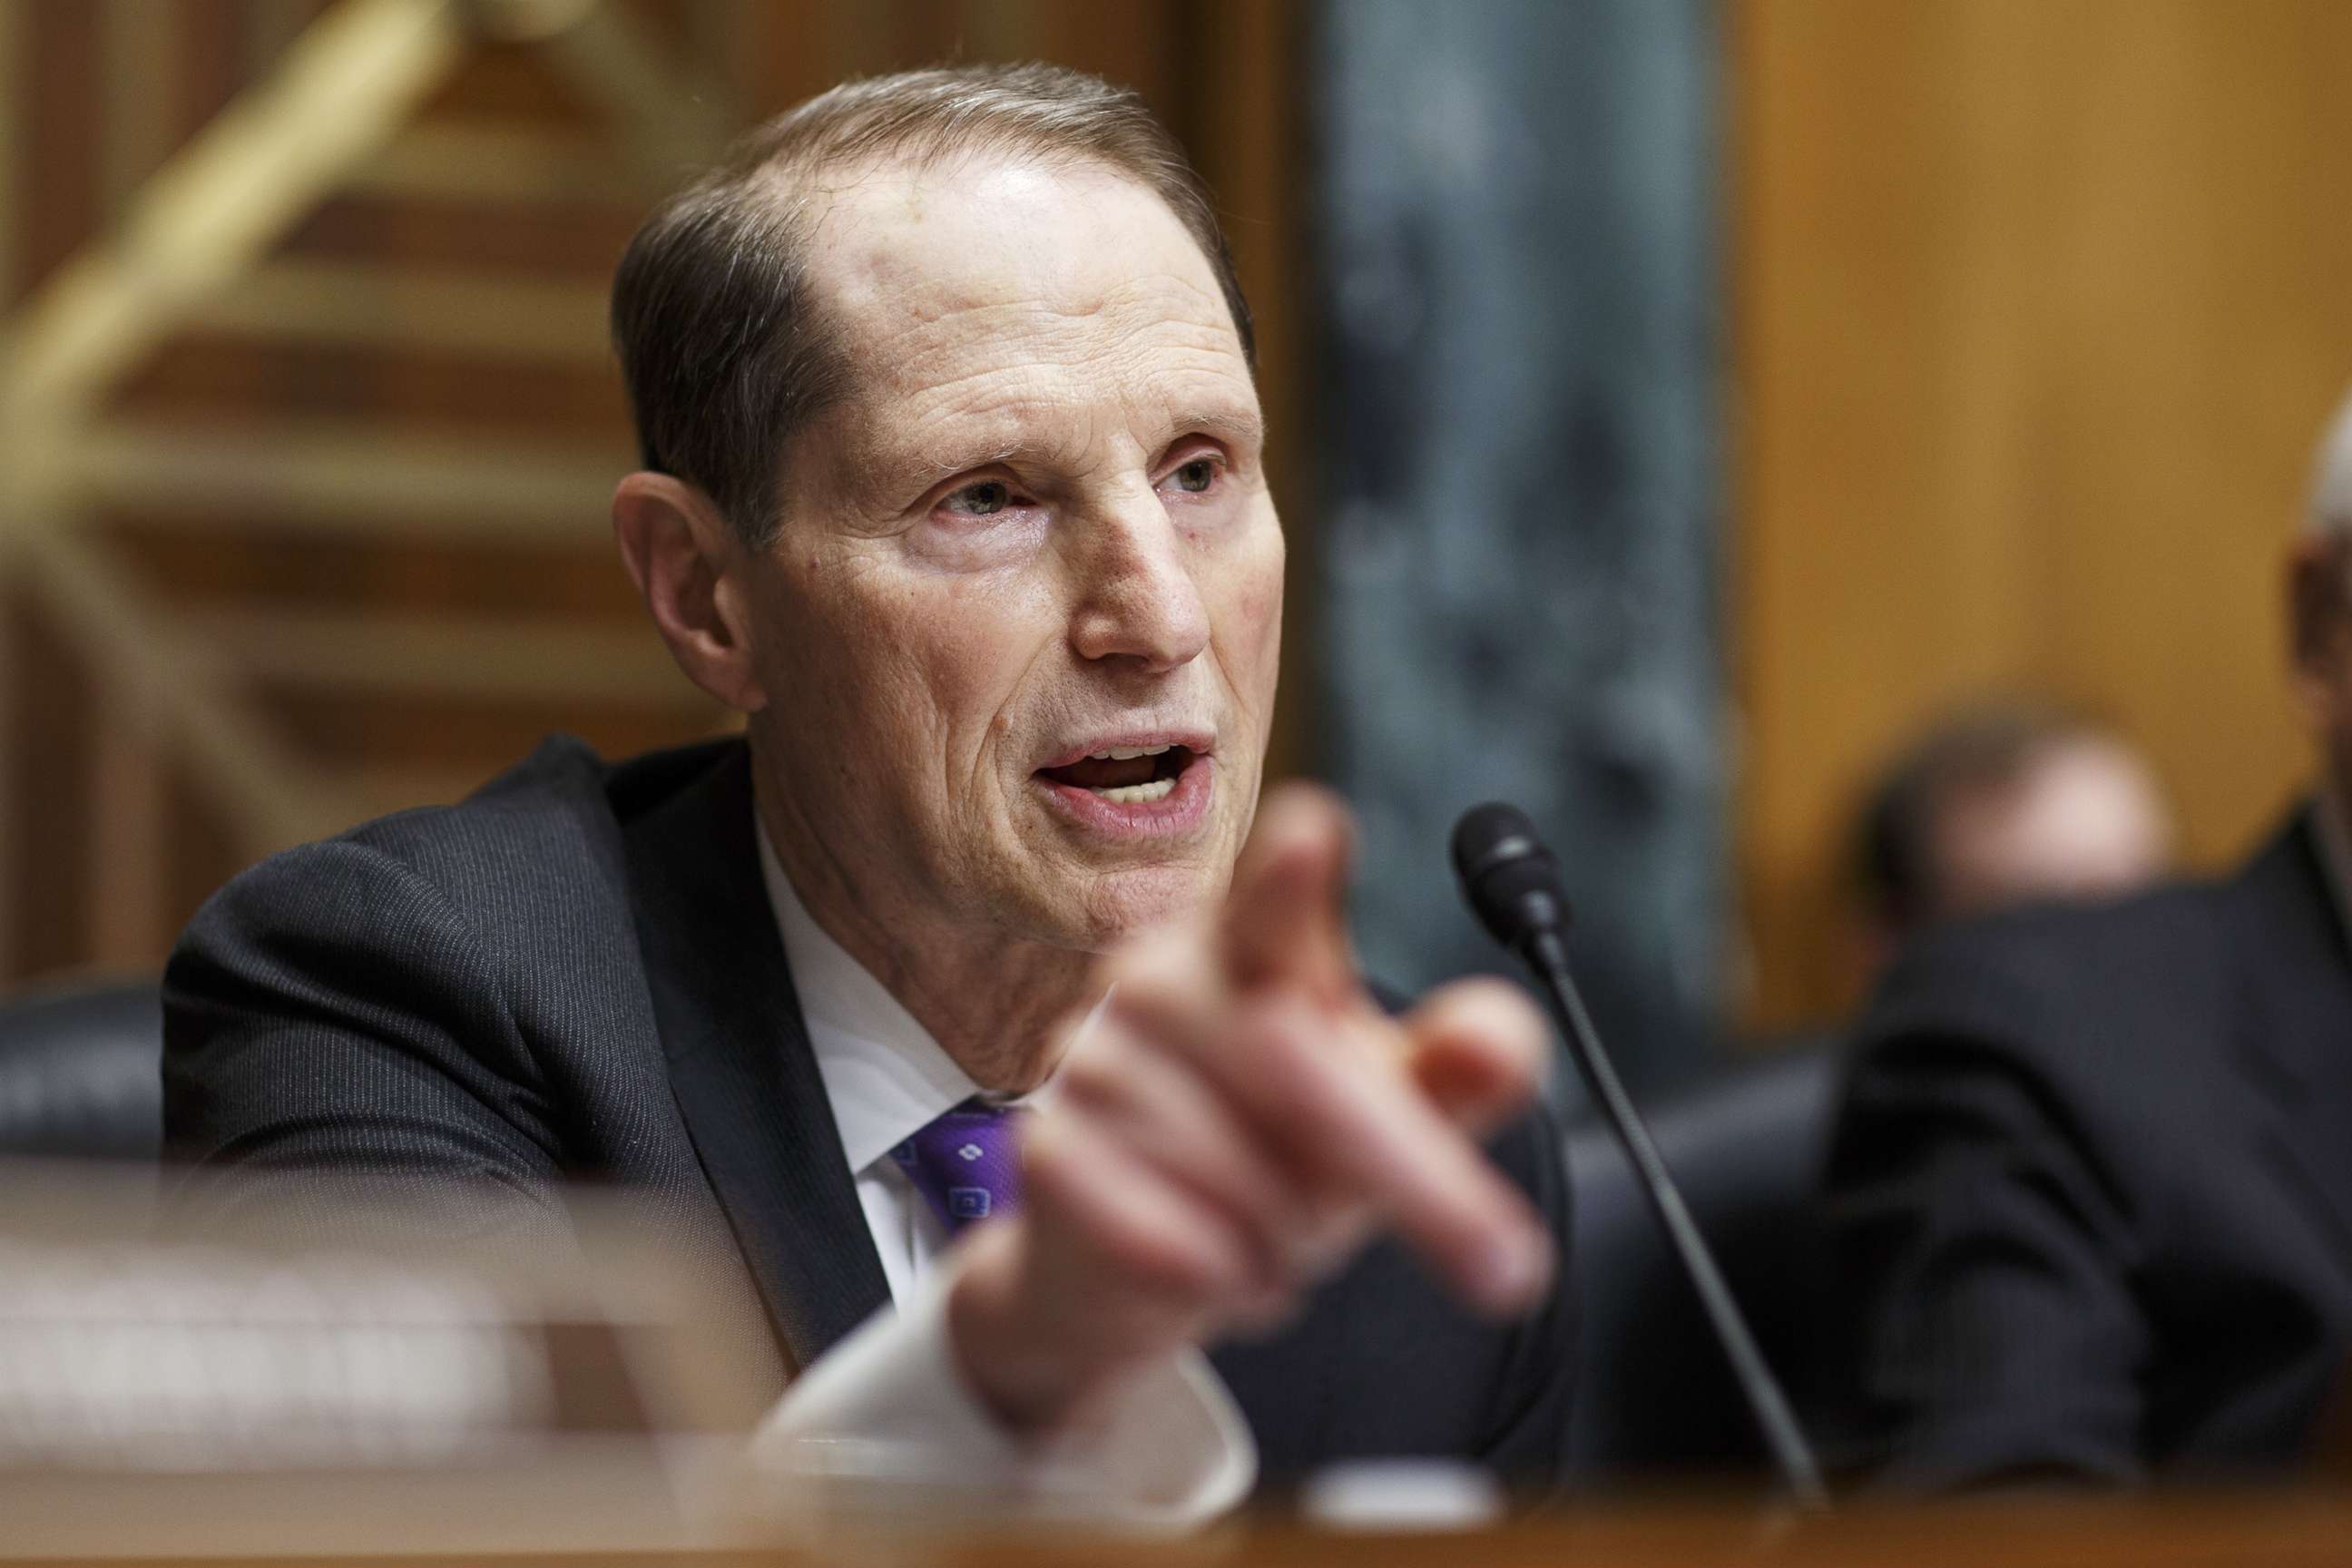 PHOTO: Senator Ron Wyden asks a question during a Senate Finance Committee hearing on Capitol Hill in Washington, March 22, 2018.